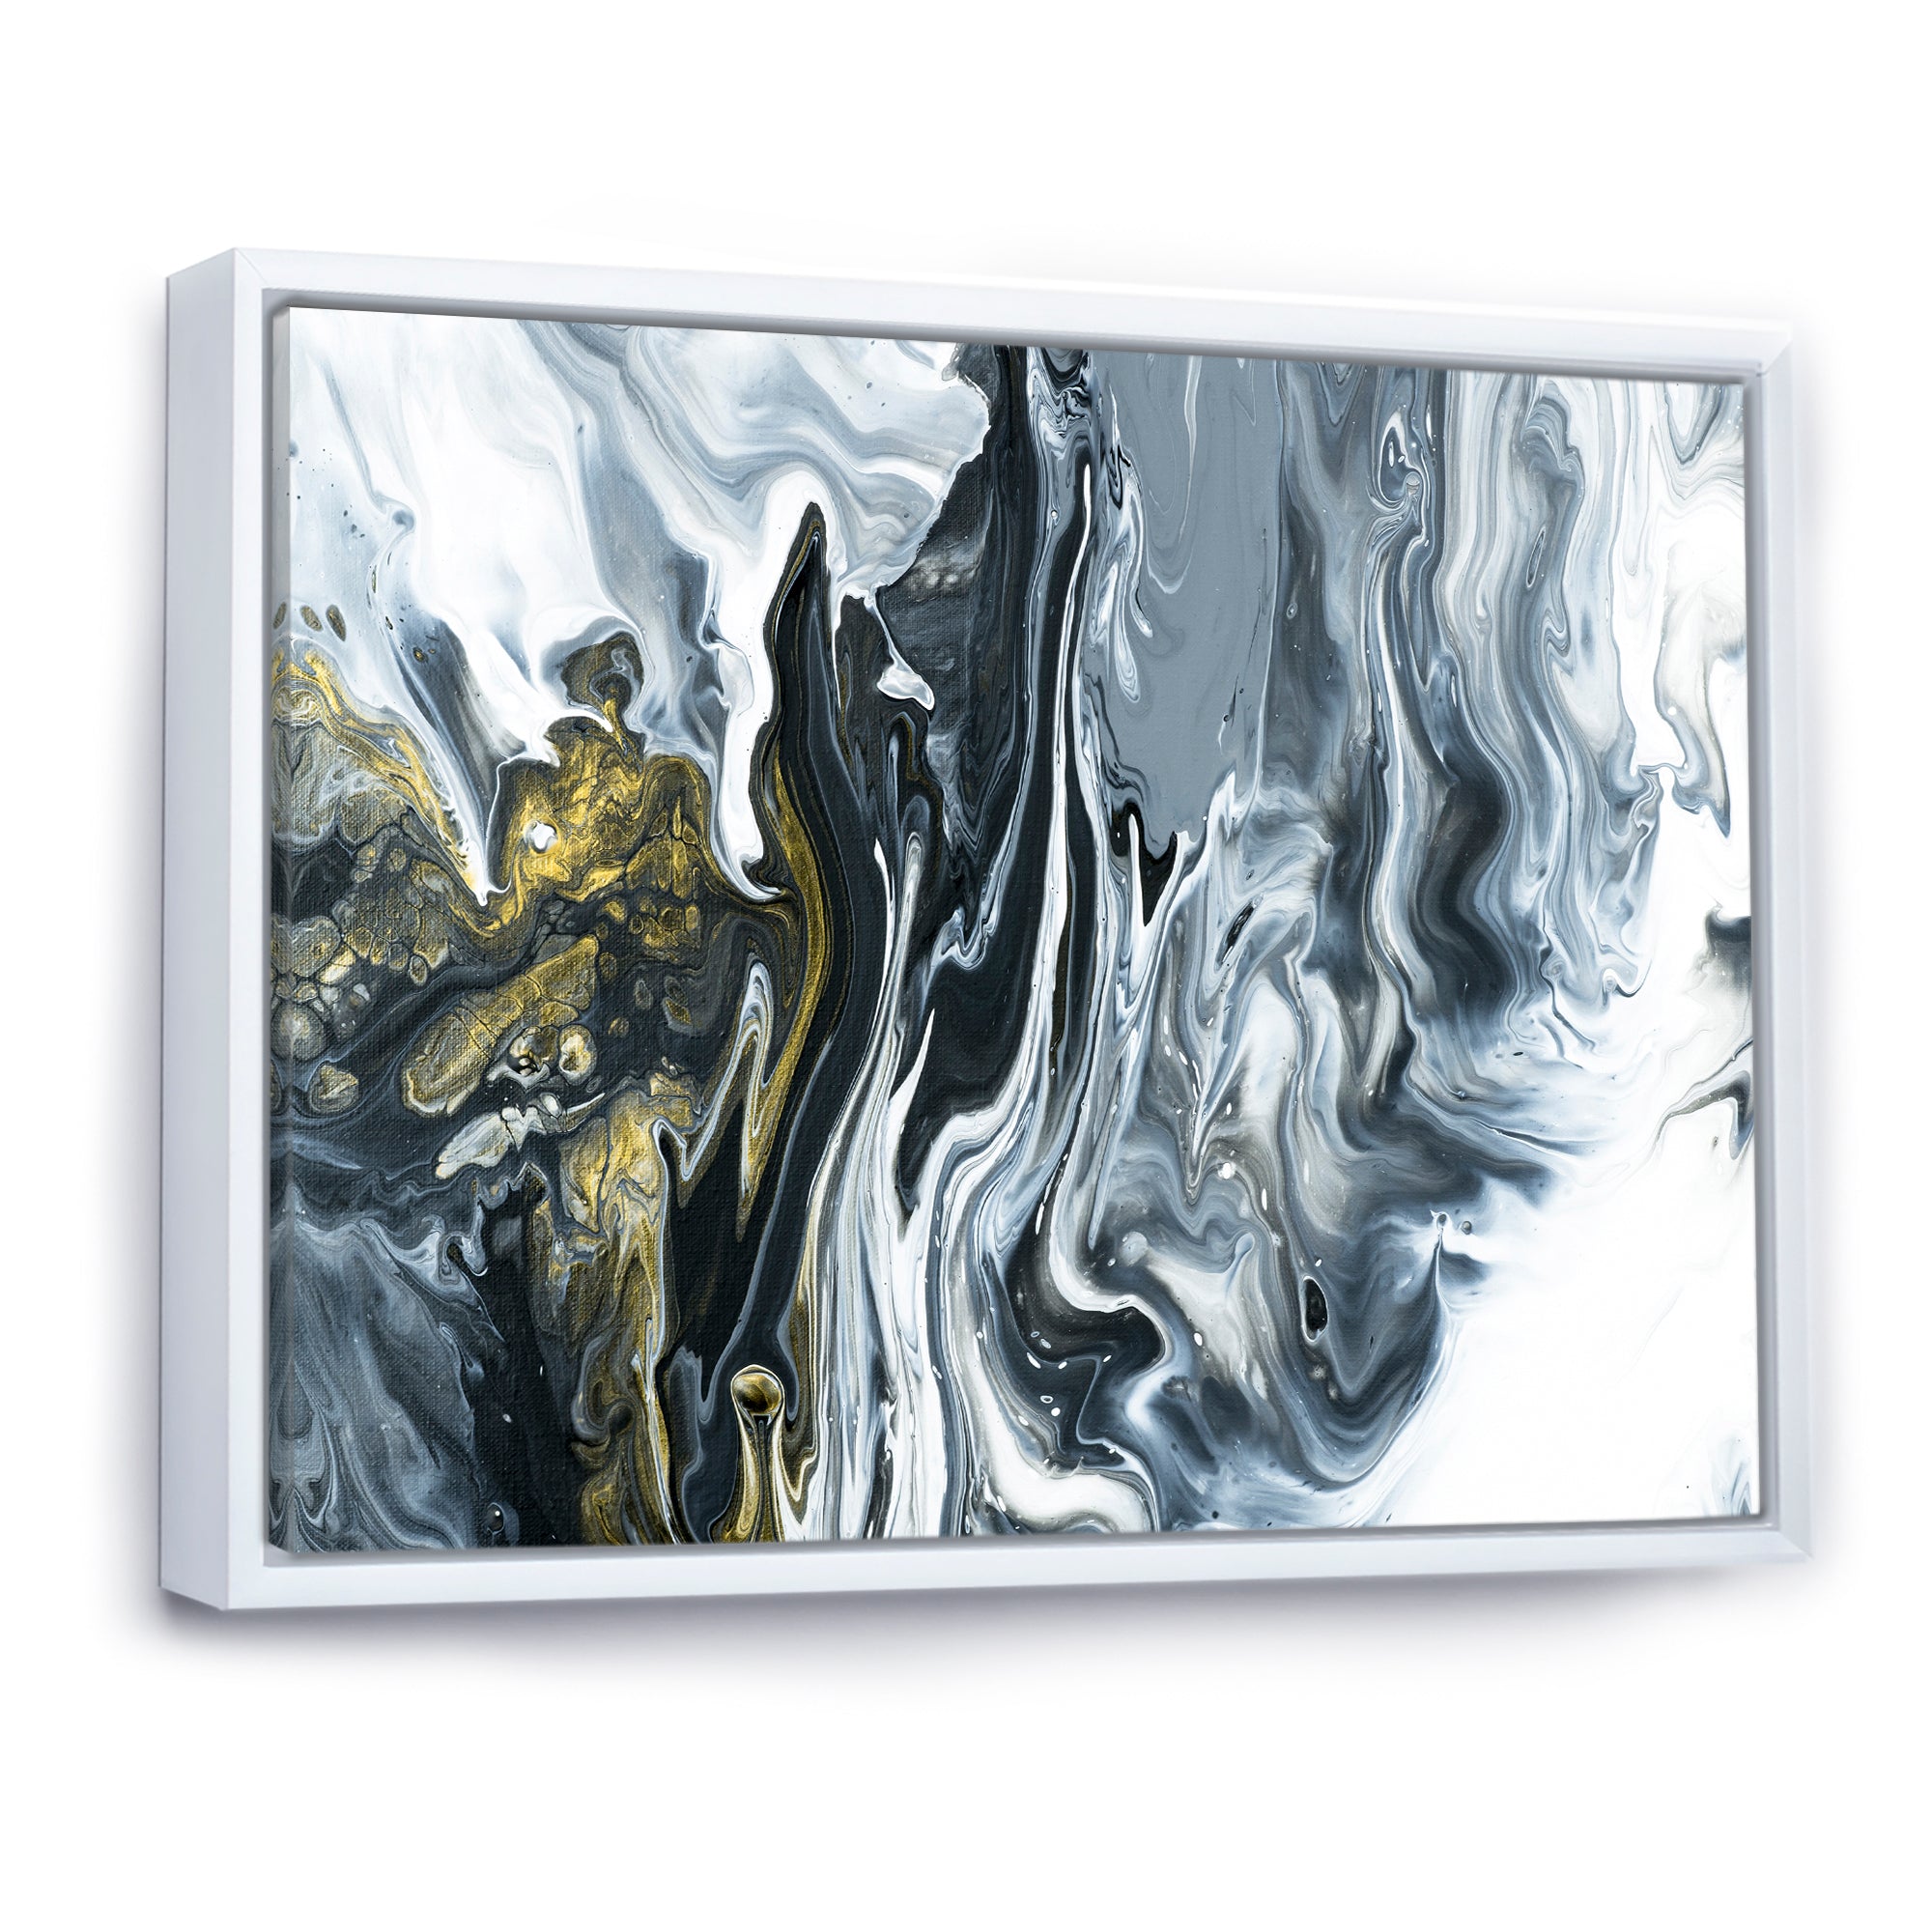 White, grey and White Hand Painted Marble Acrylic